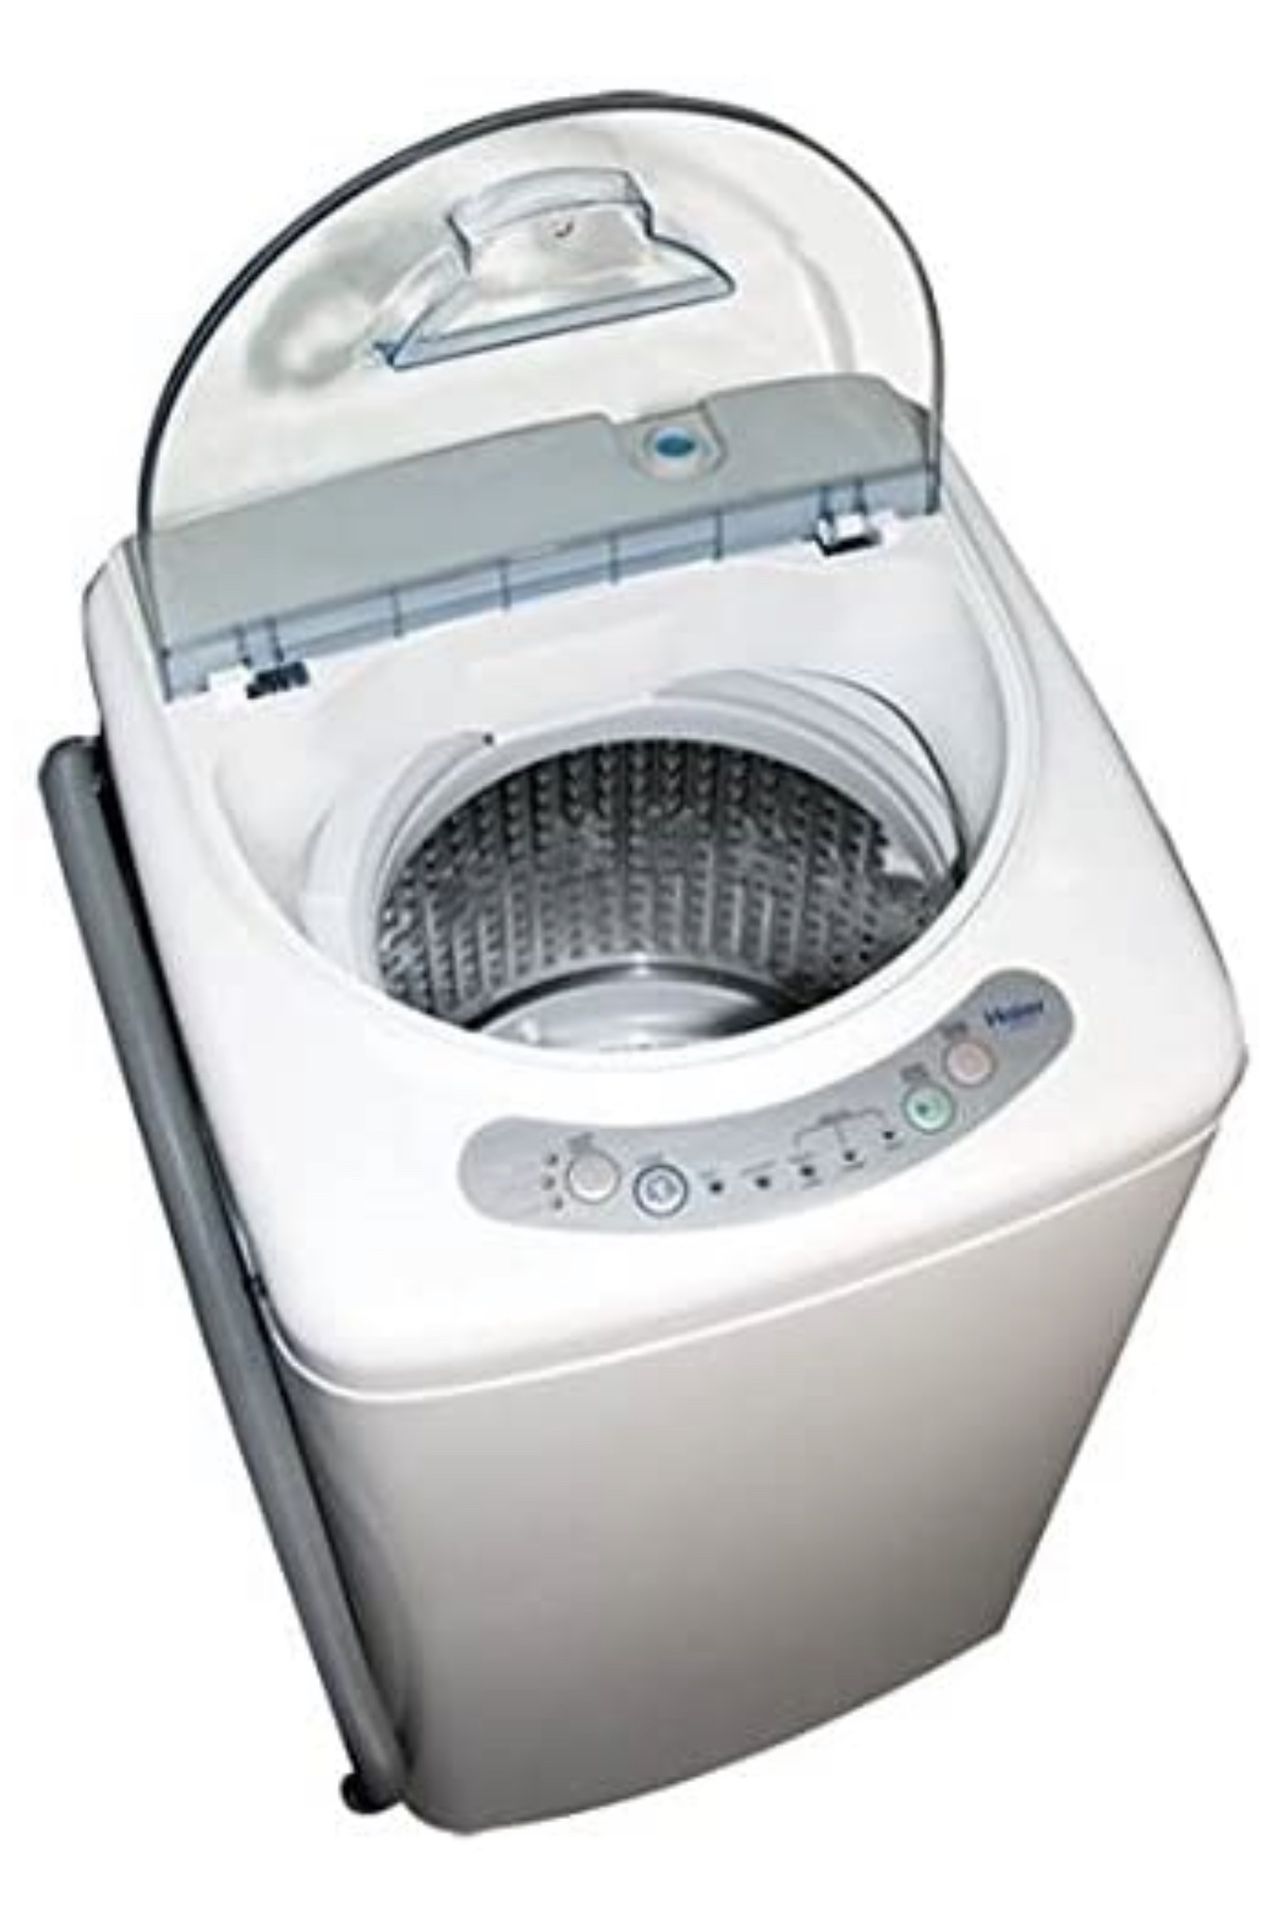 Portable Washer And Dryer Bundle